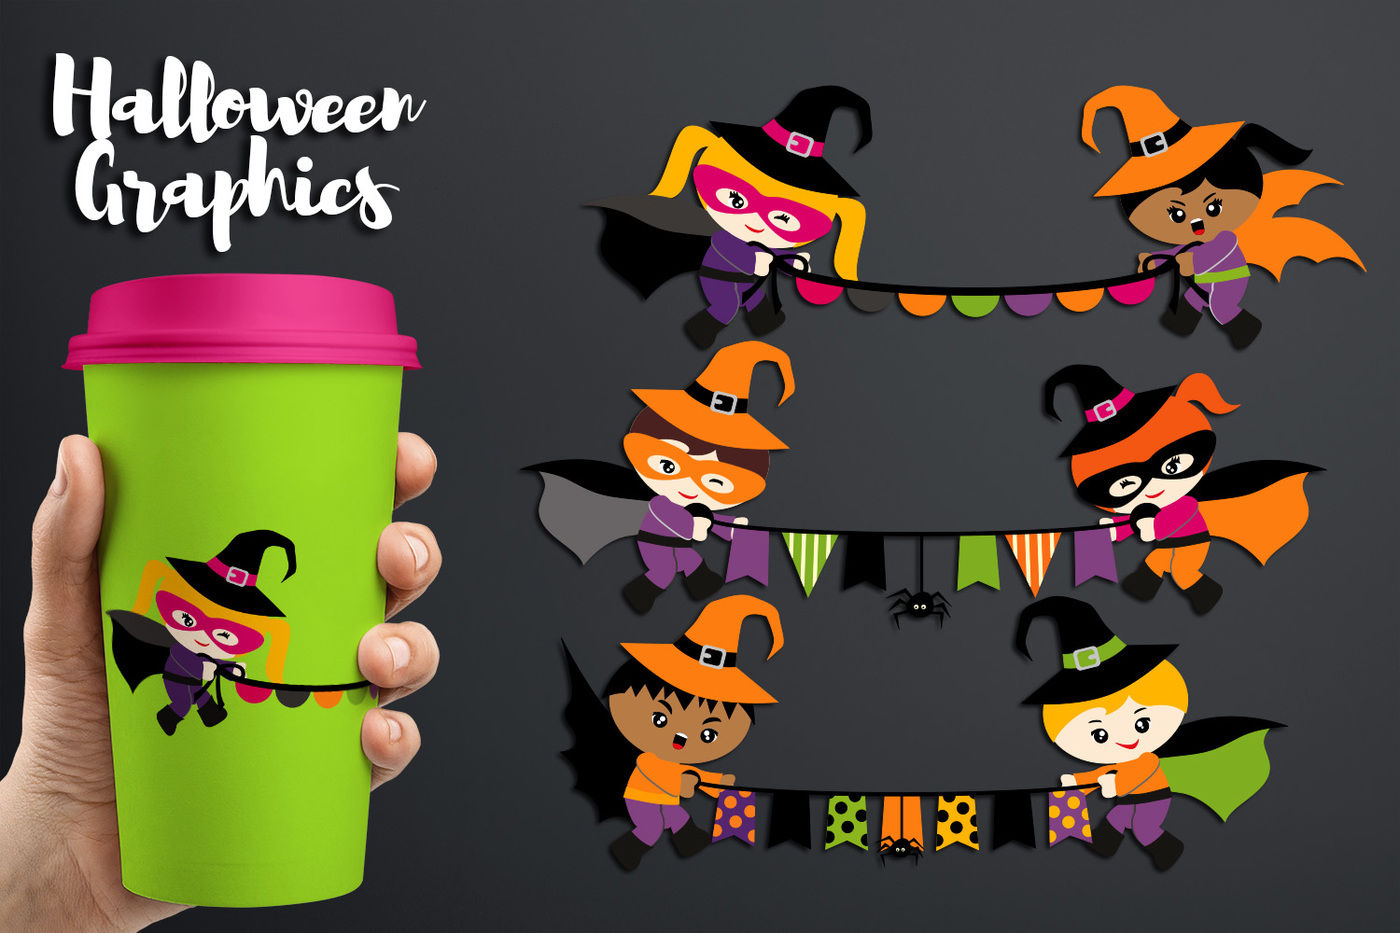 Superhero Banners Halloween Clipart Graphics By ...